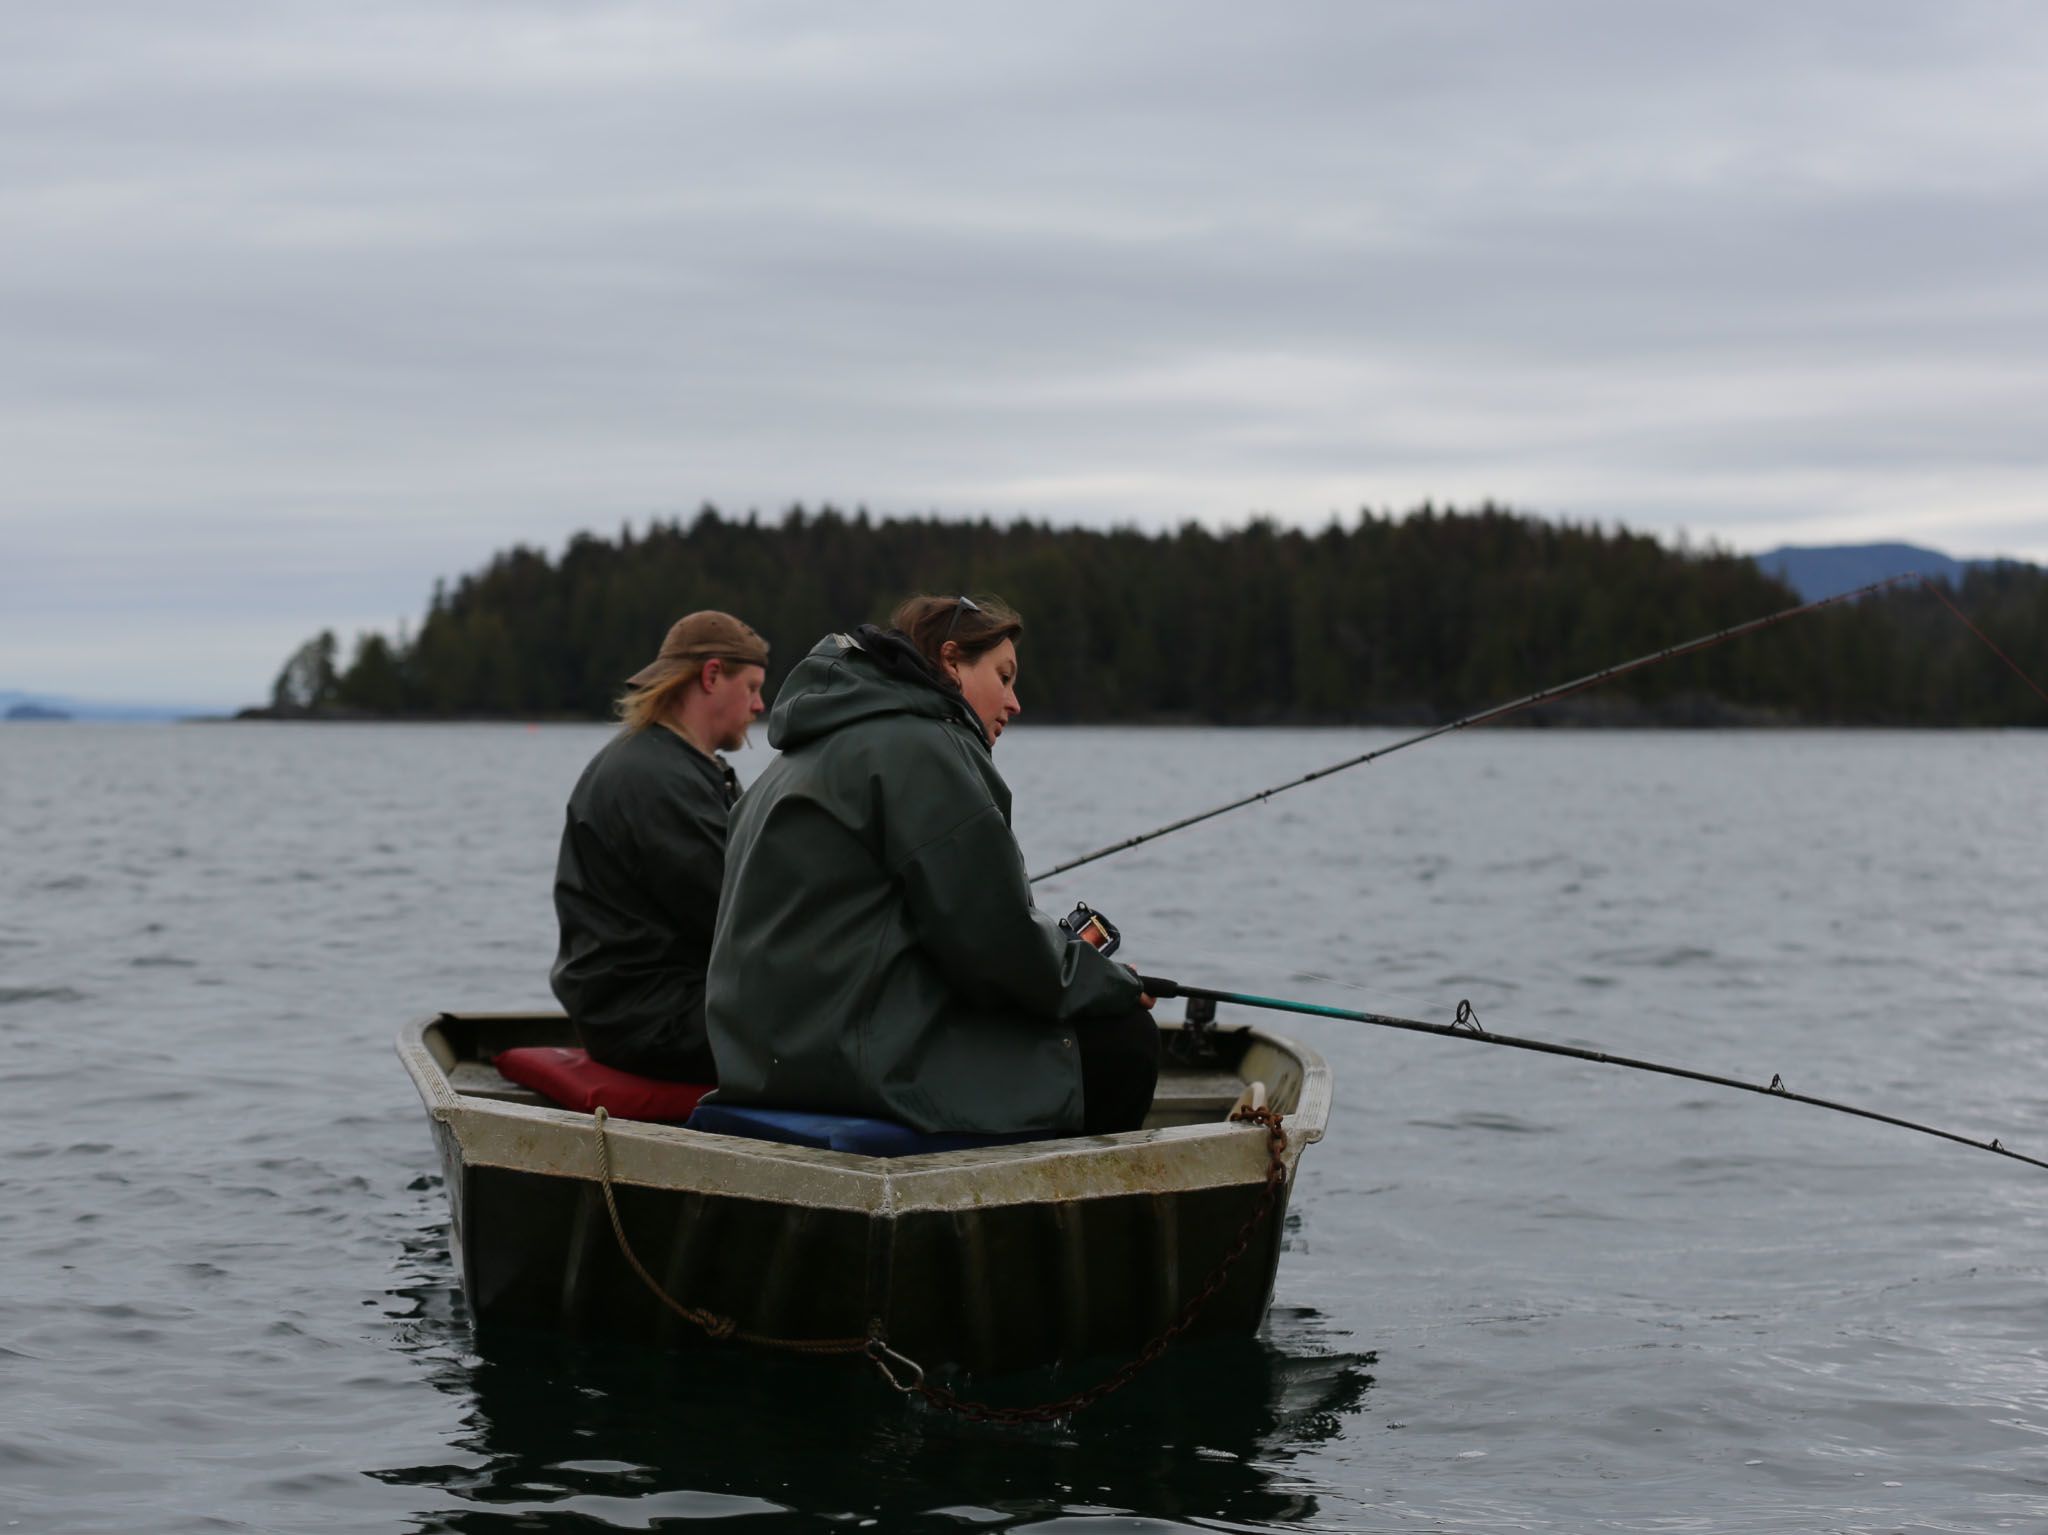 David Squibb & Kristina Jackson are out on their skiff jigging for fish on the waters outside... [Photo of the day - May 2021]